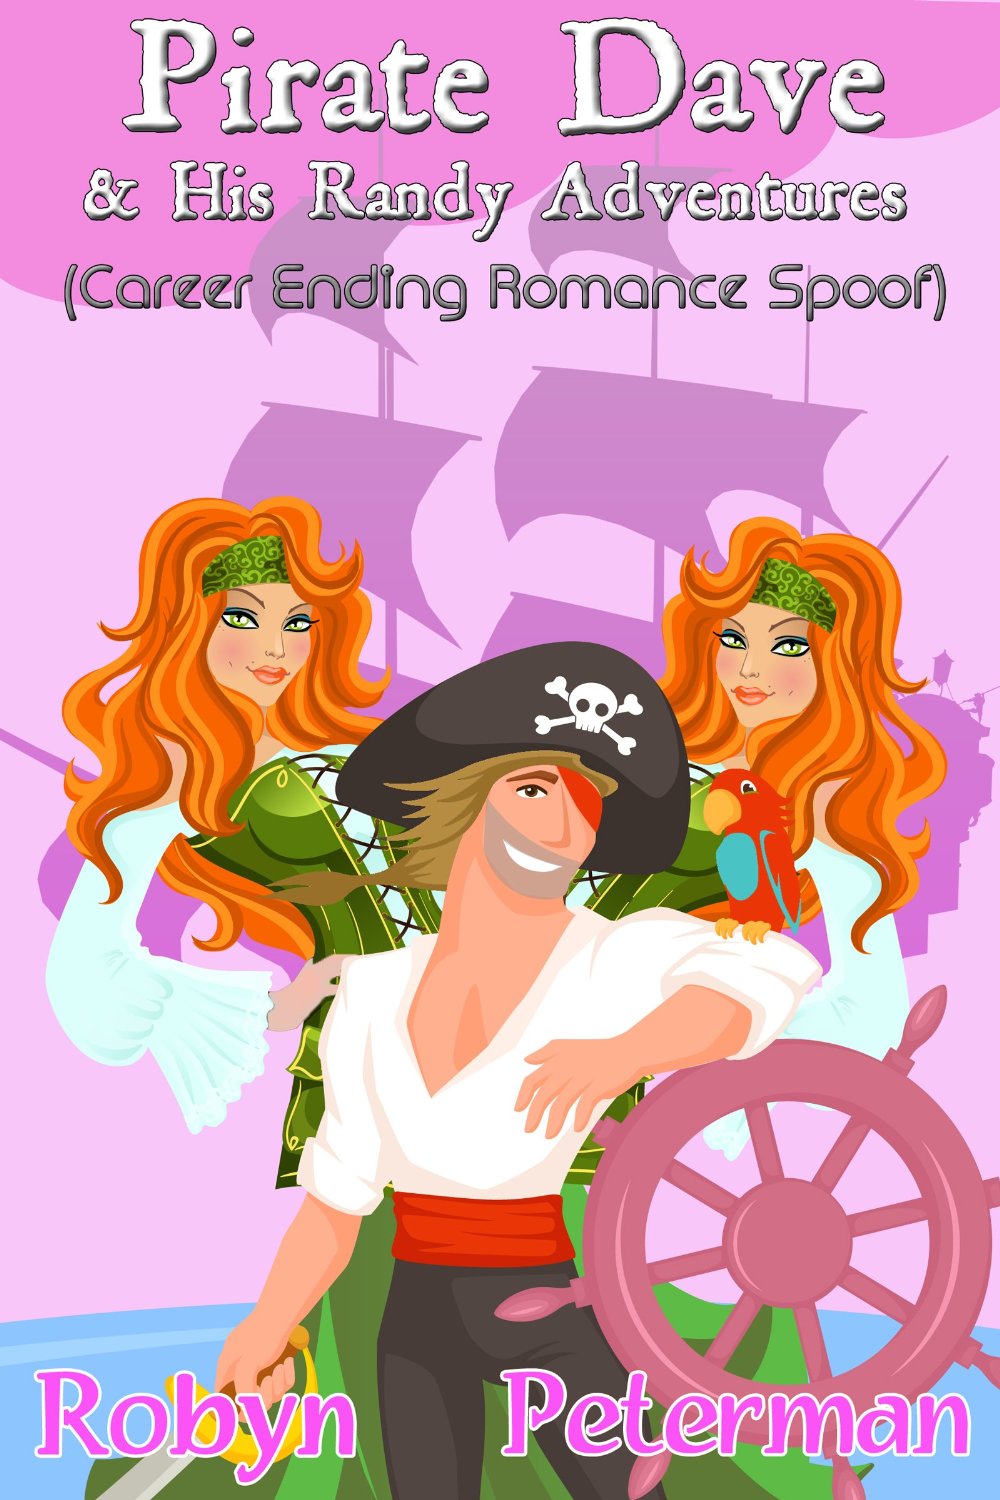 Pirate Dave and his Randy Adventures (Career Ending Romance Spoof) by Robyn Peterman